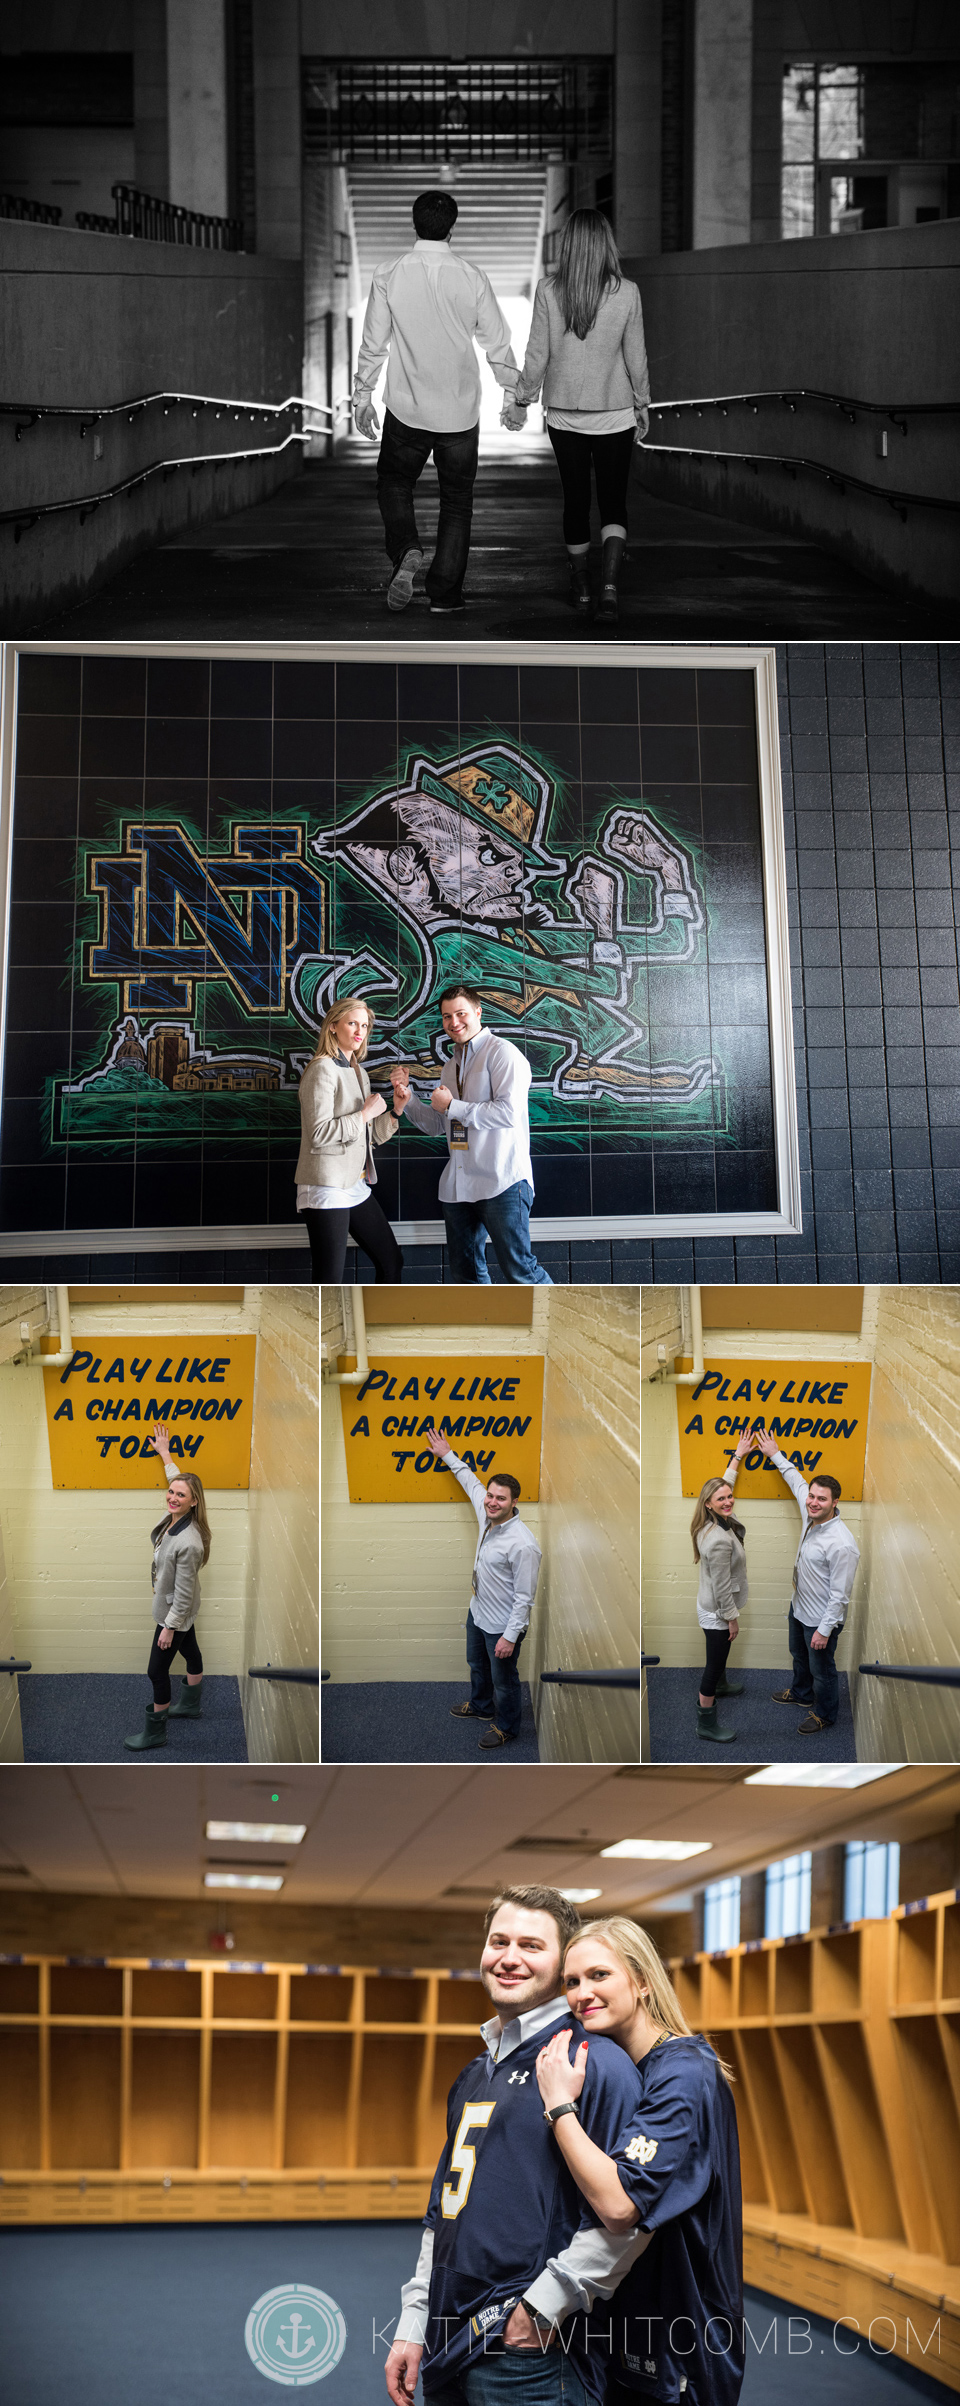 Couple posing around Notre Dame football stadium after getting engaged